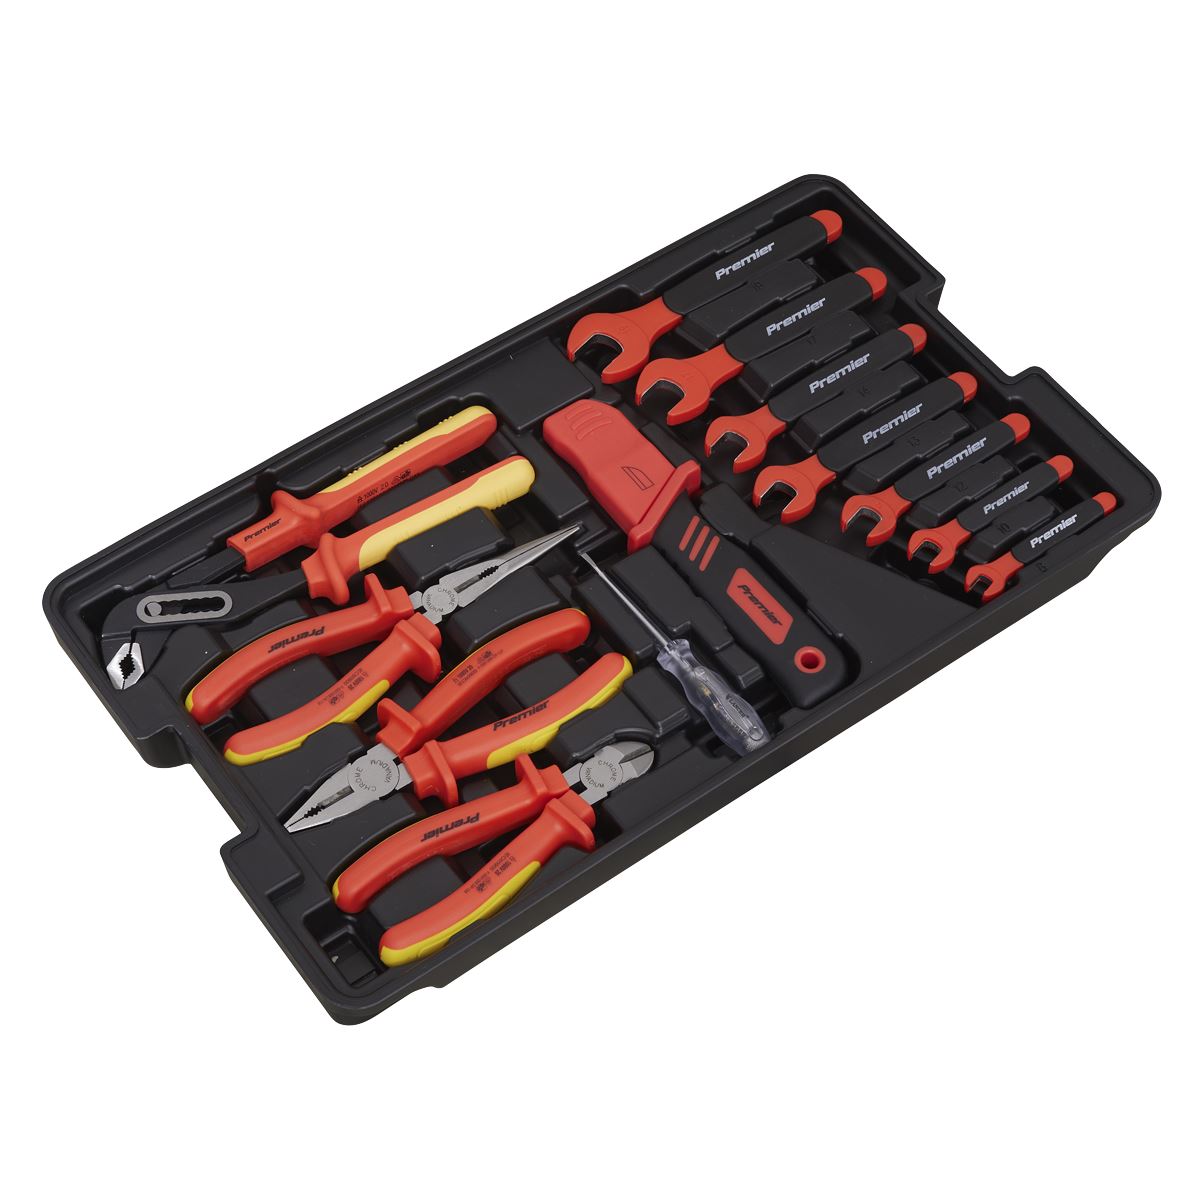 Sealey Premier 1000V Insulated Tool Kit 1/2"Sq Drive 49pc